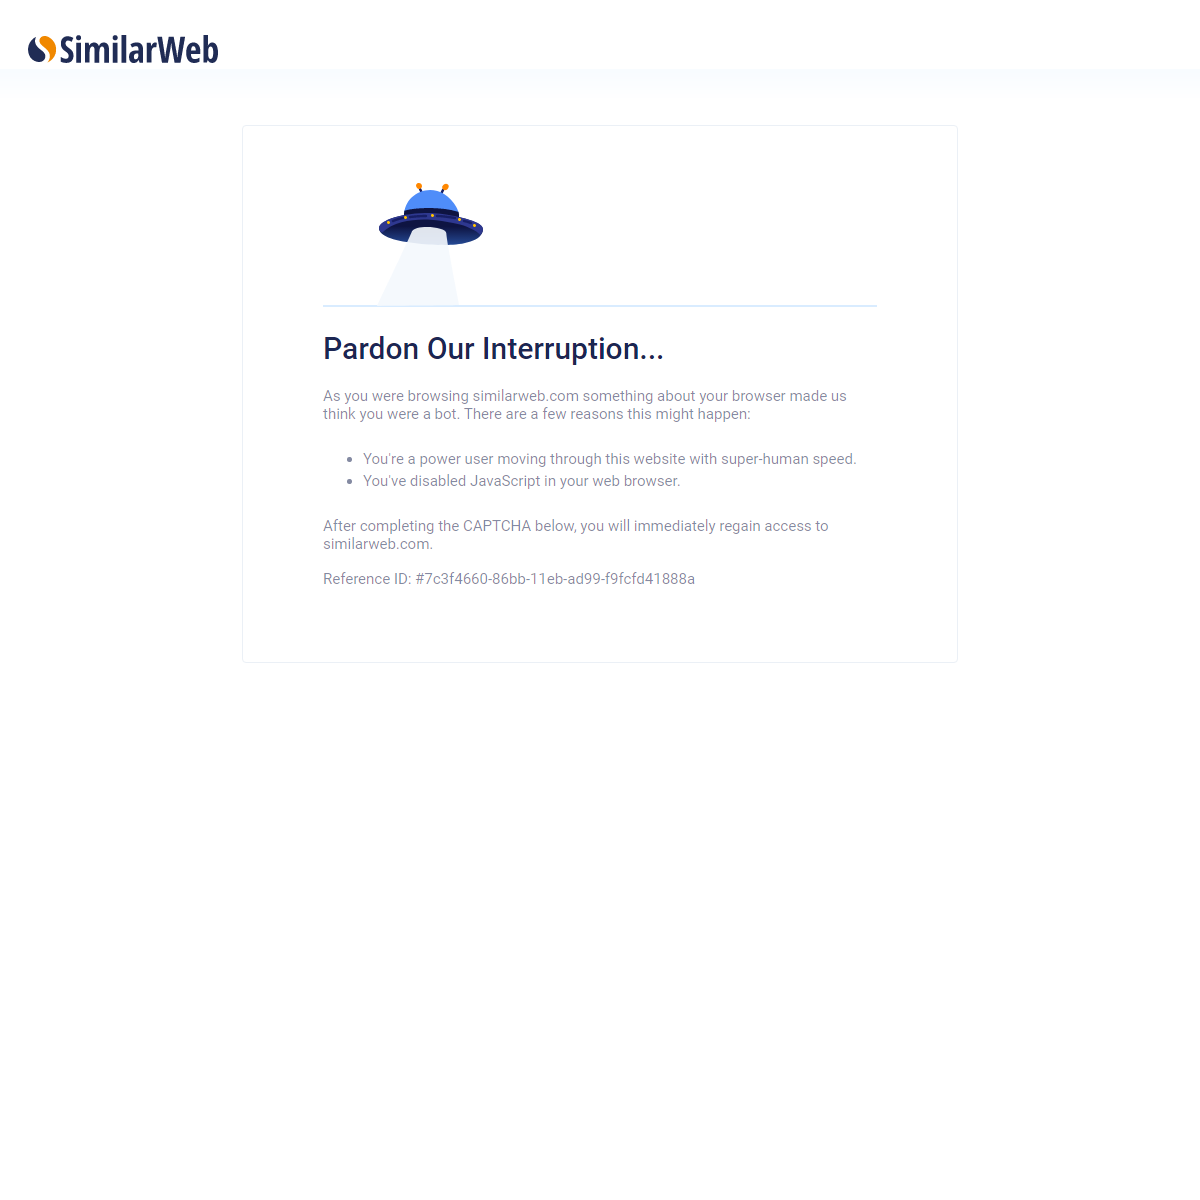 A complete backup of https://www.similarweb.com/website/cleanbrowsing.org